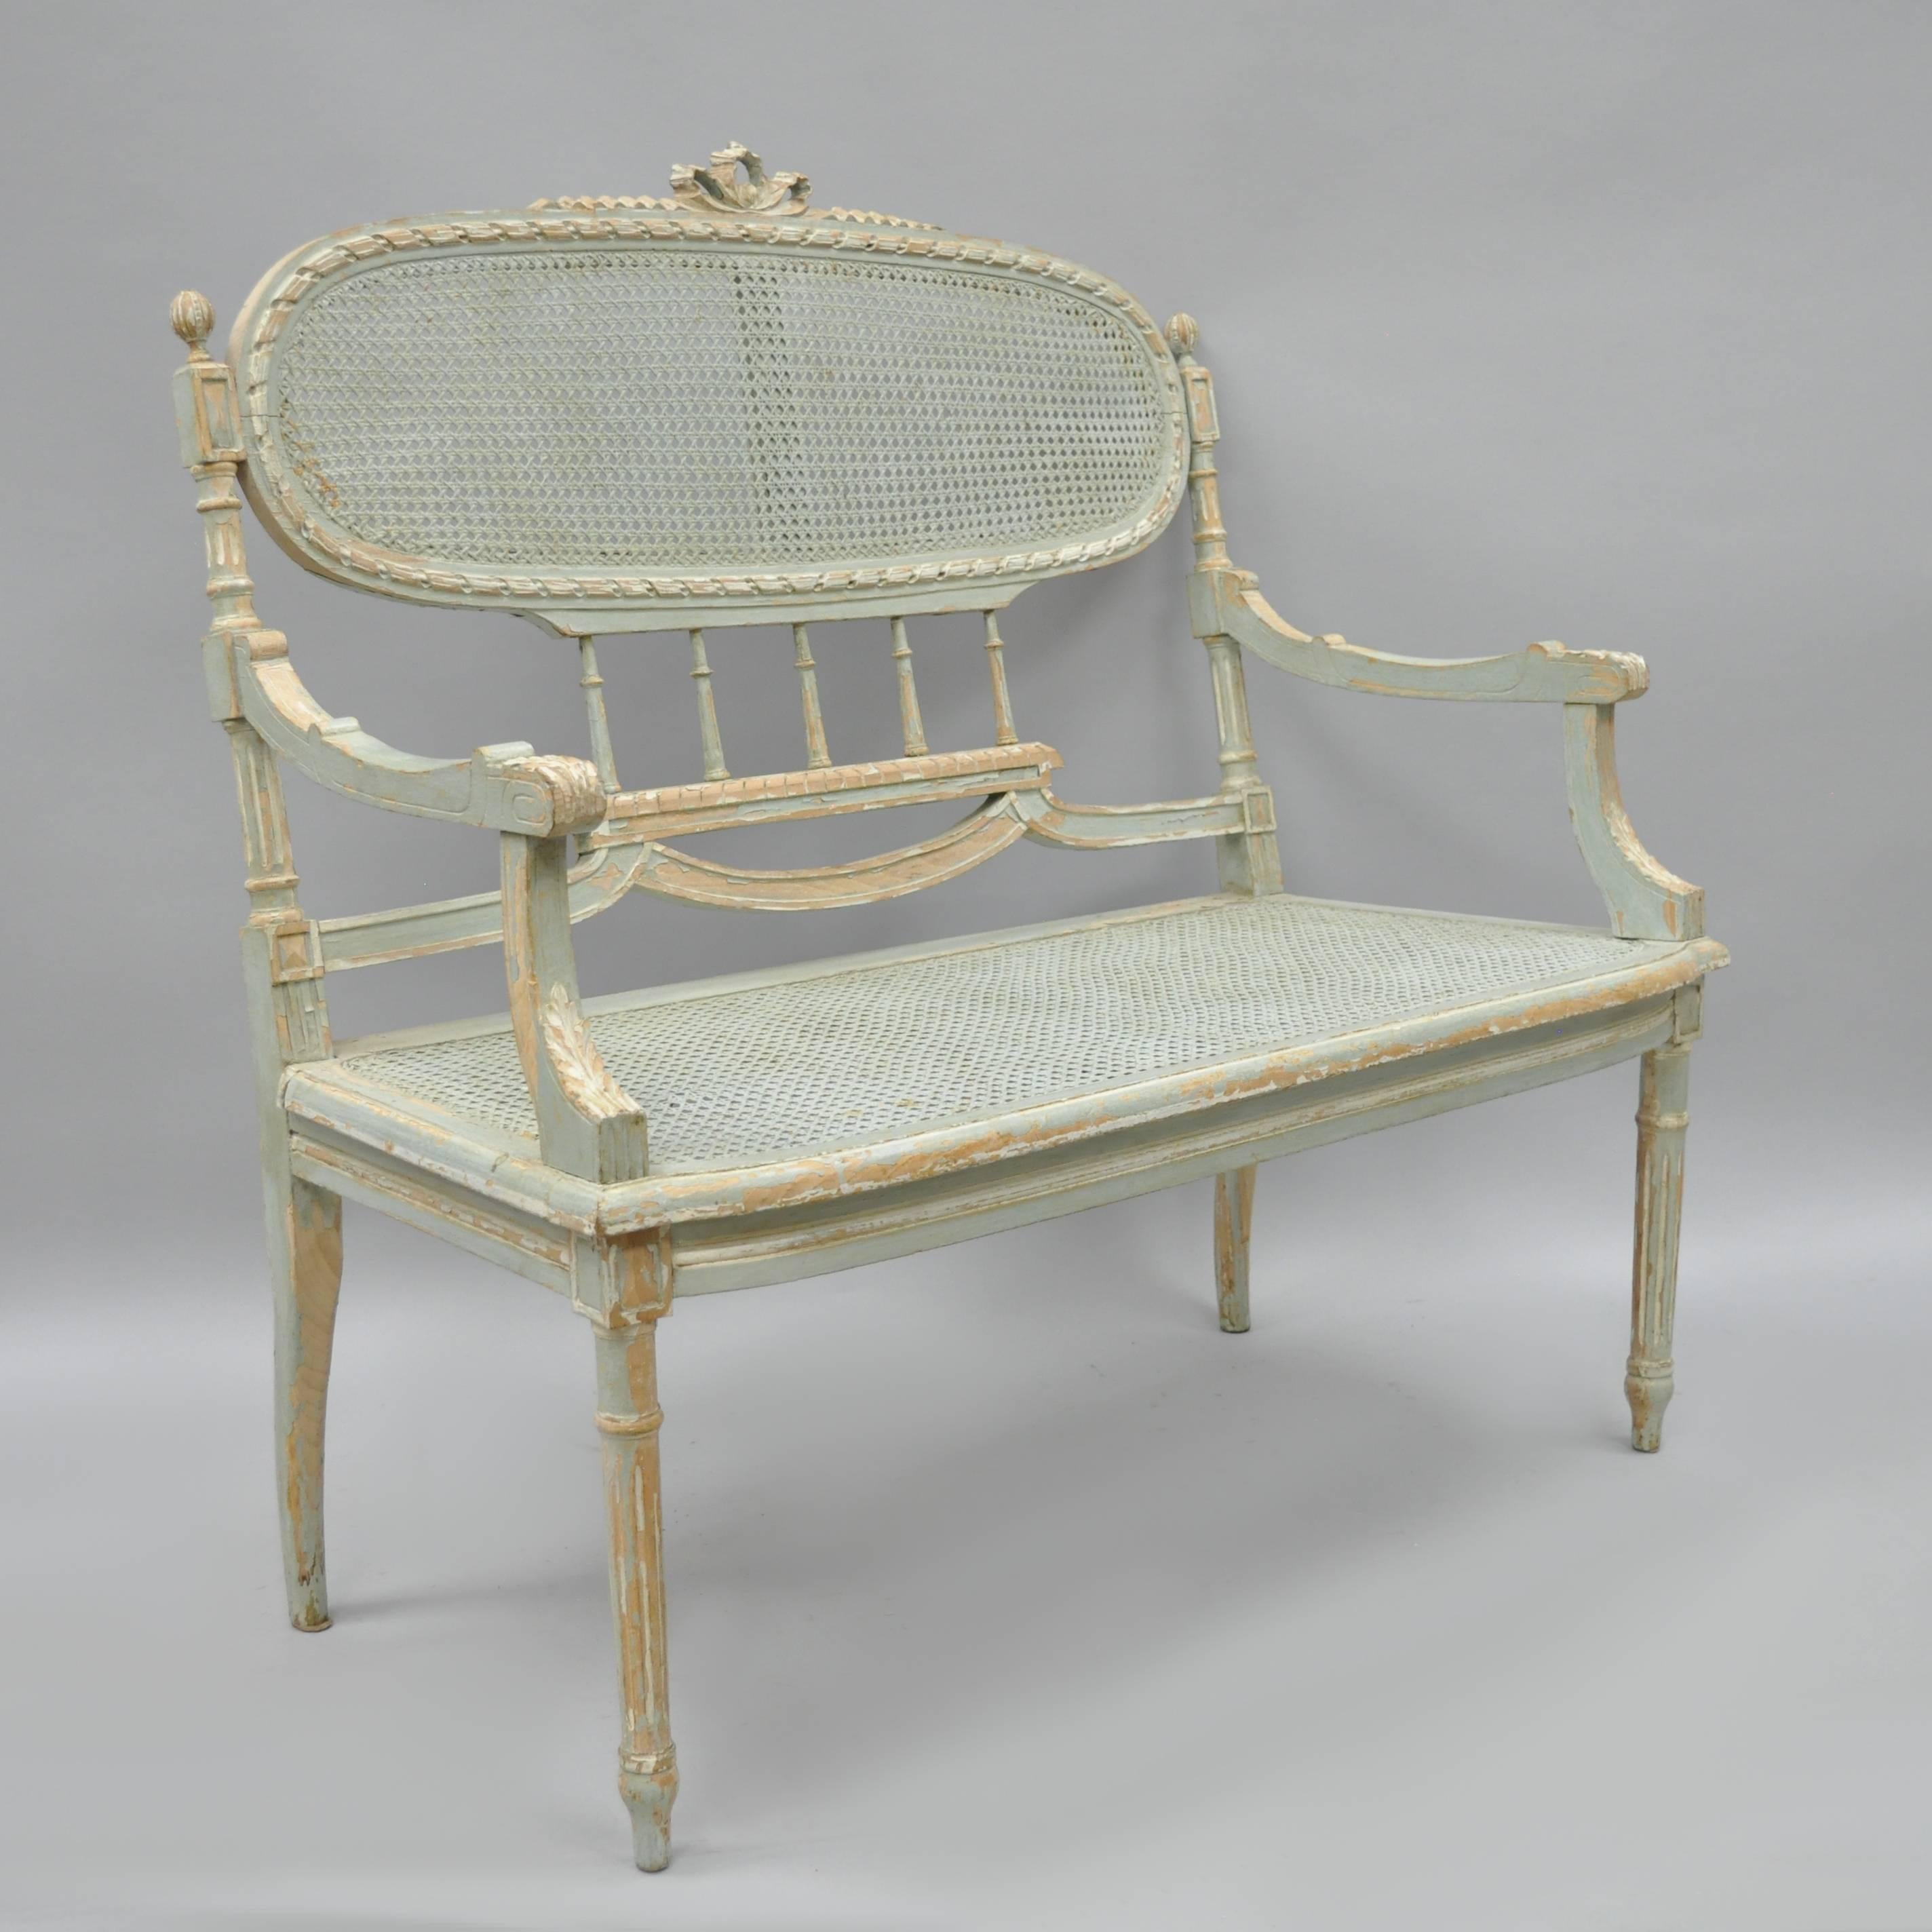 Distress painted French Louis XVI style settee. Chair is constructed of solid wood with reeded and tapered legs, carved bow tie crest and other classic French carvings throughout. Back and seat are caned and the original painted finish shows